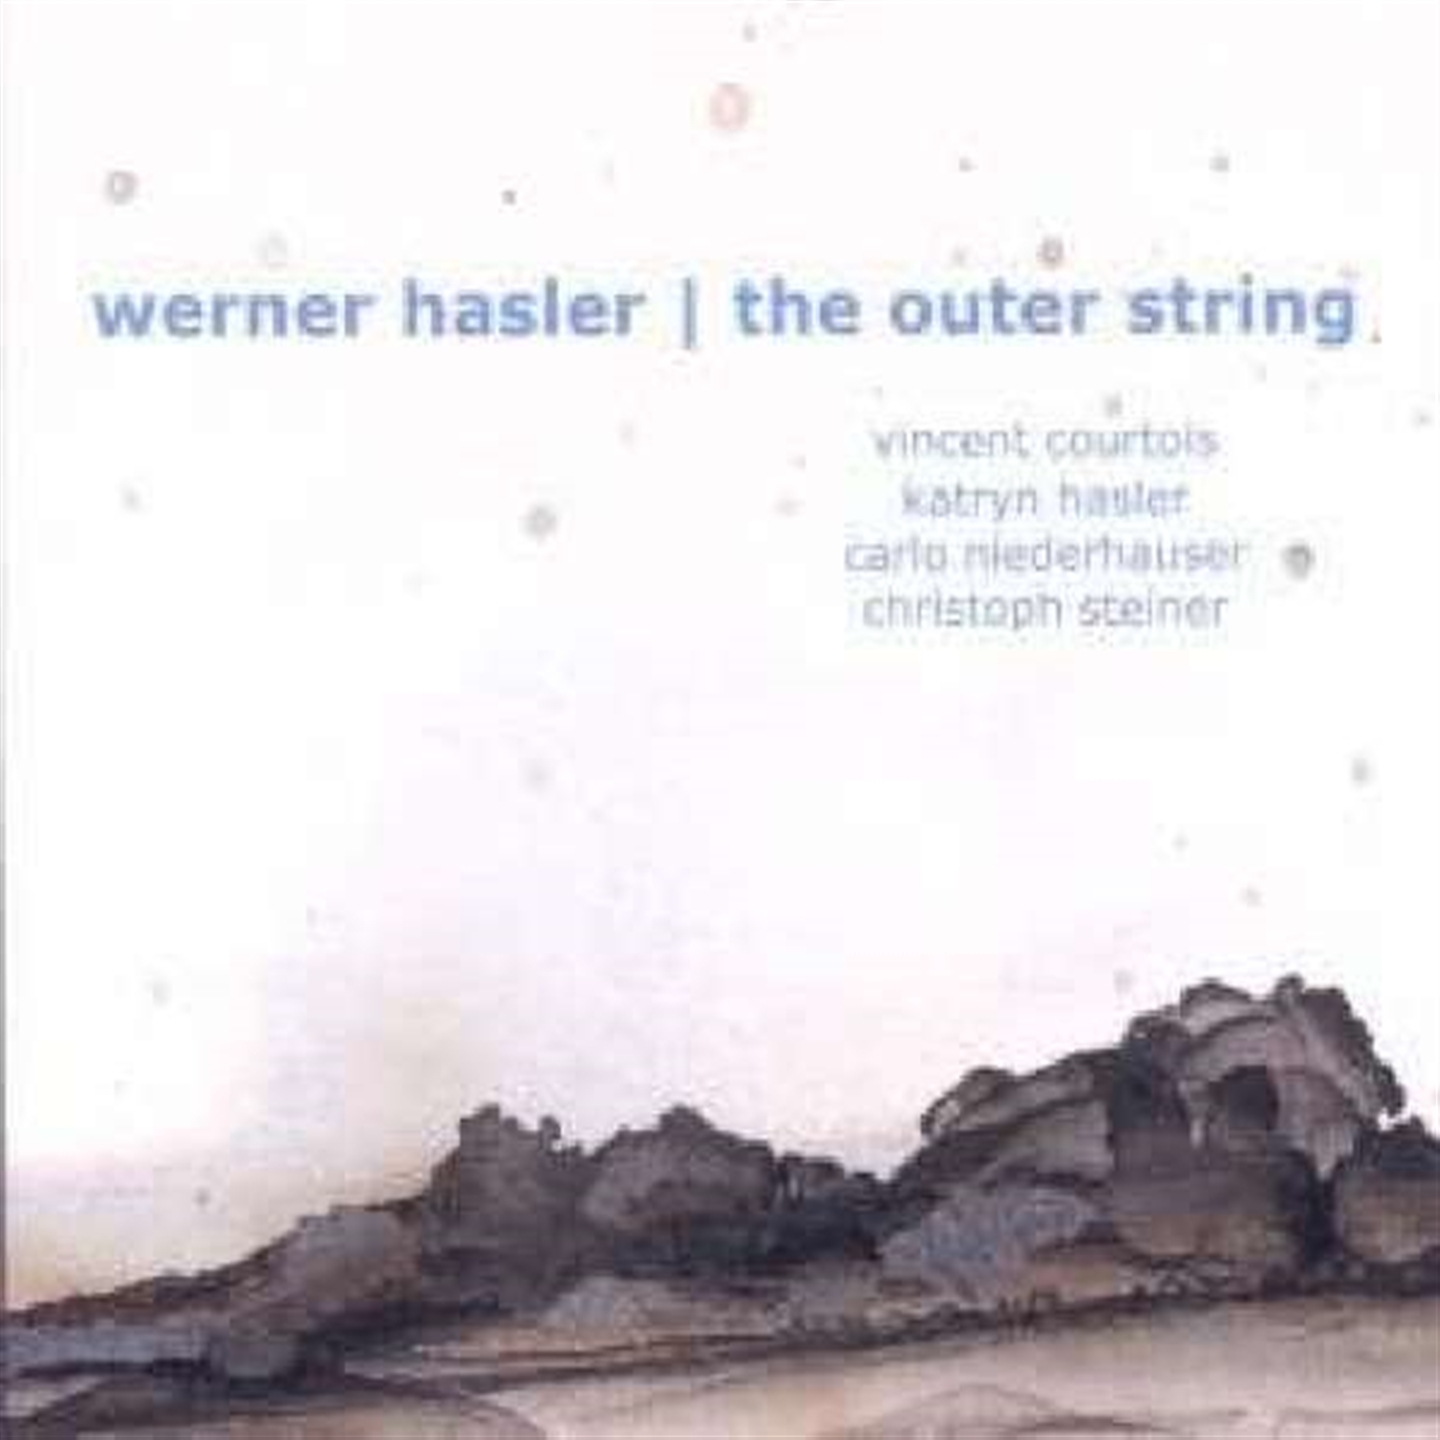 THE OUTER STRING